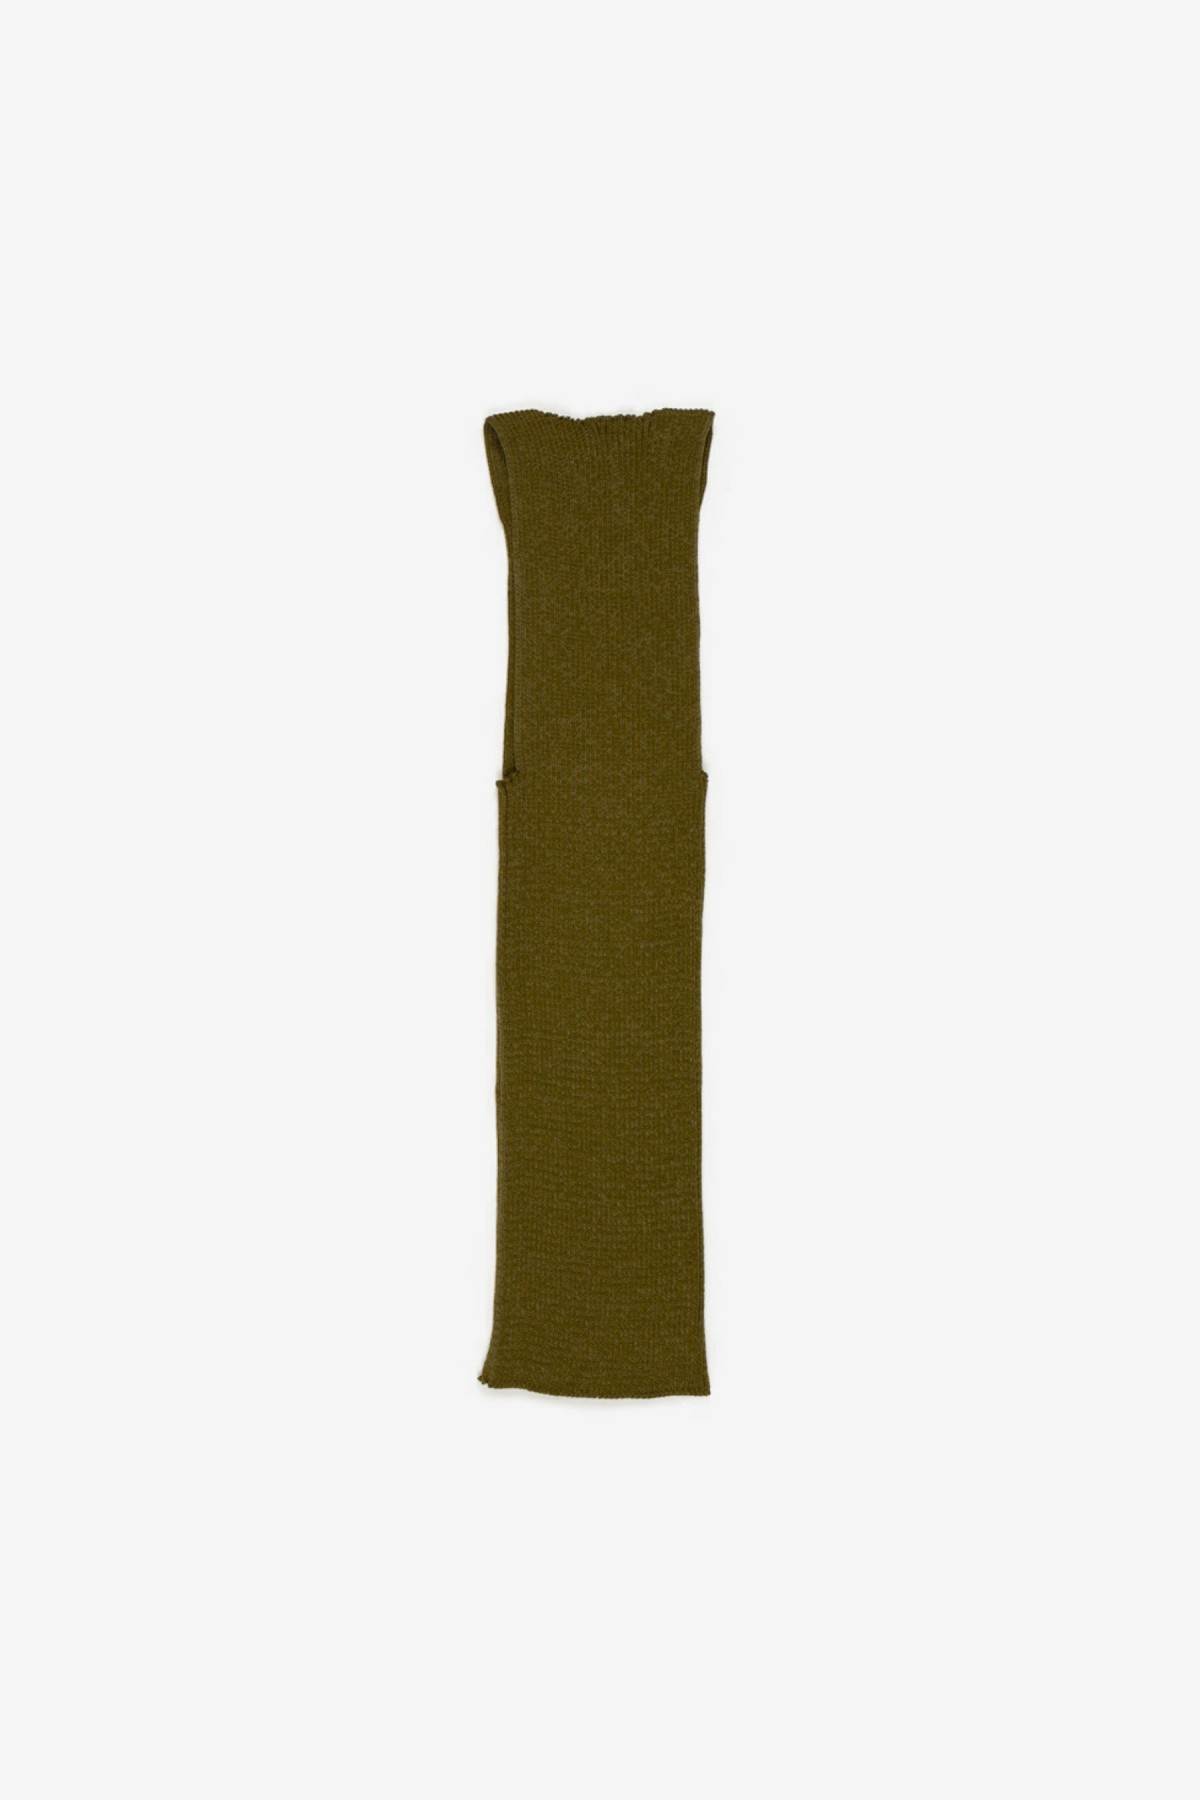 A. Roege Hove Emma High Neck Top in Moss Green